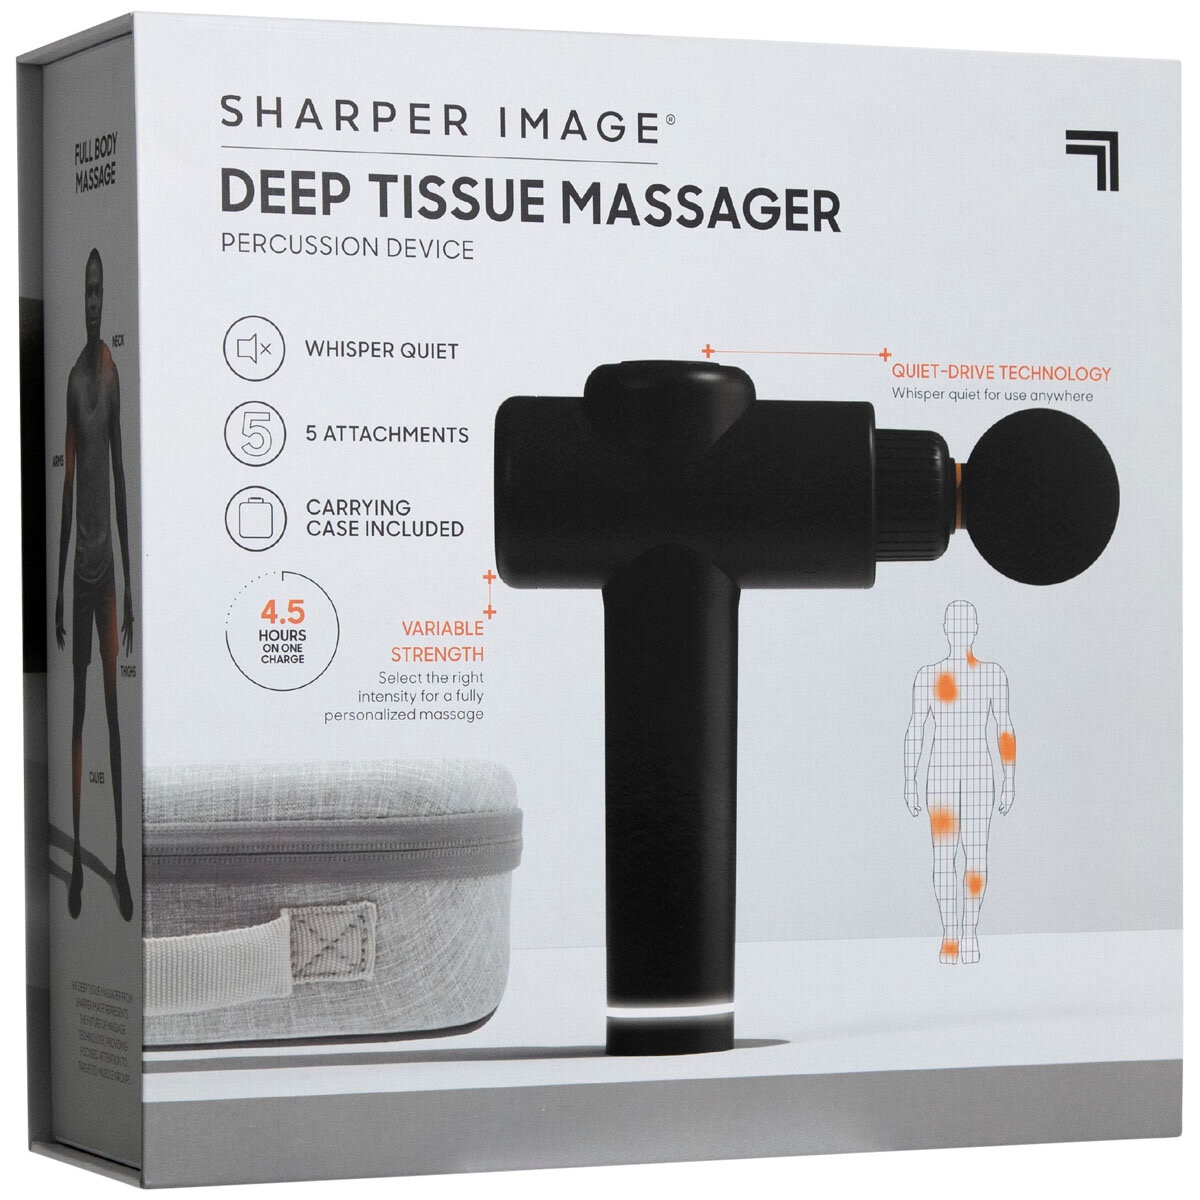 Sharper Image Powerboost Percussion Massager